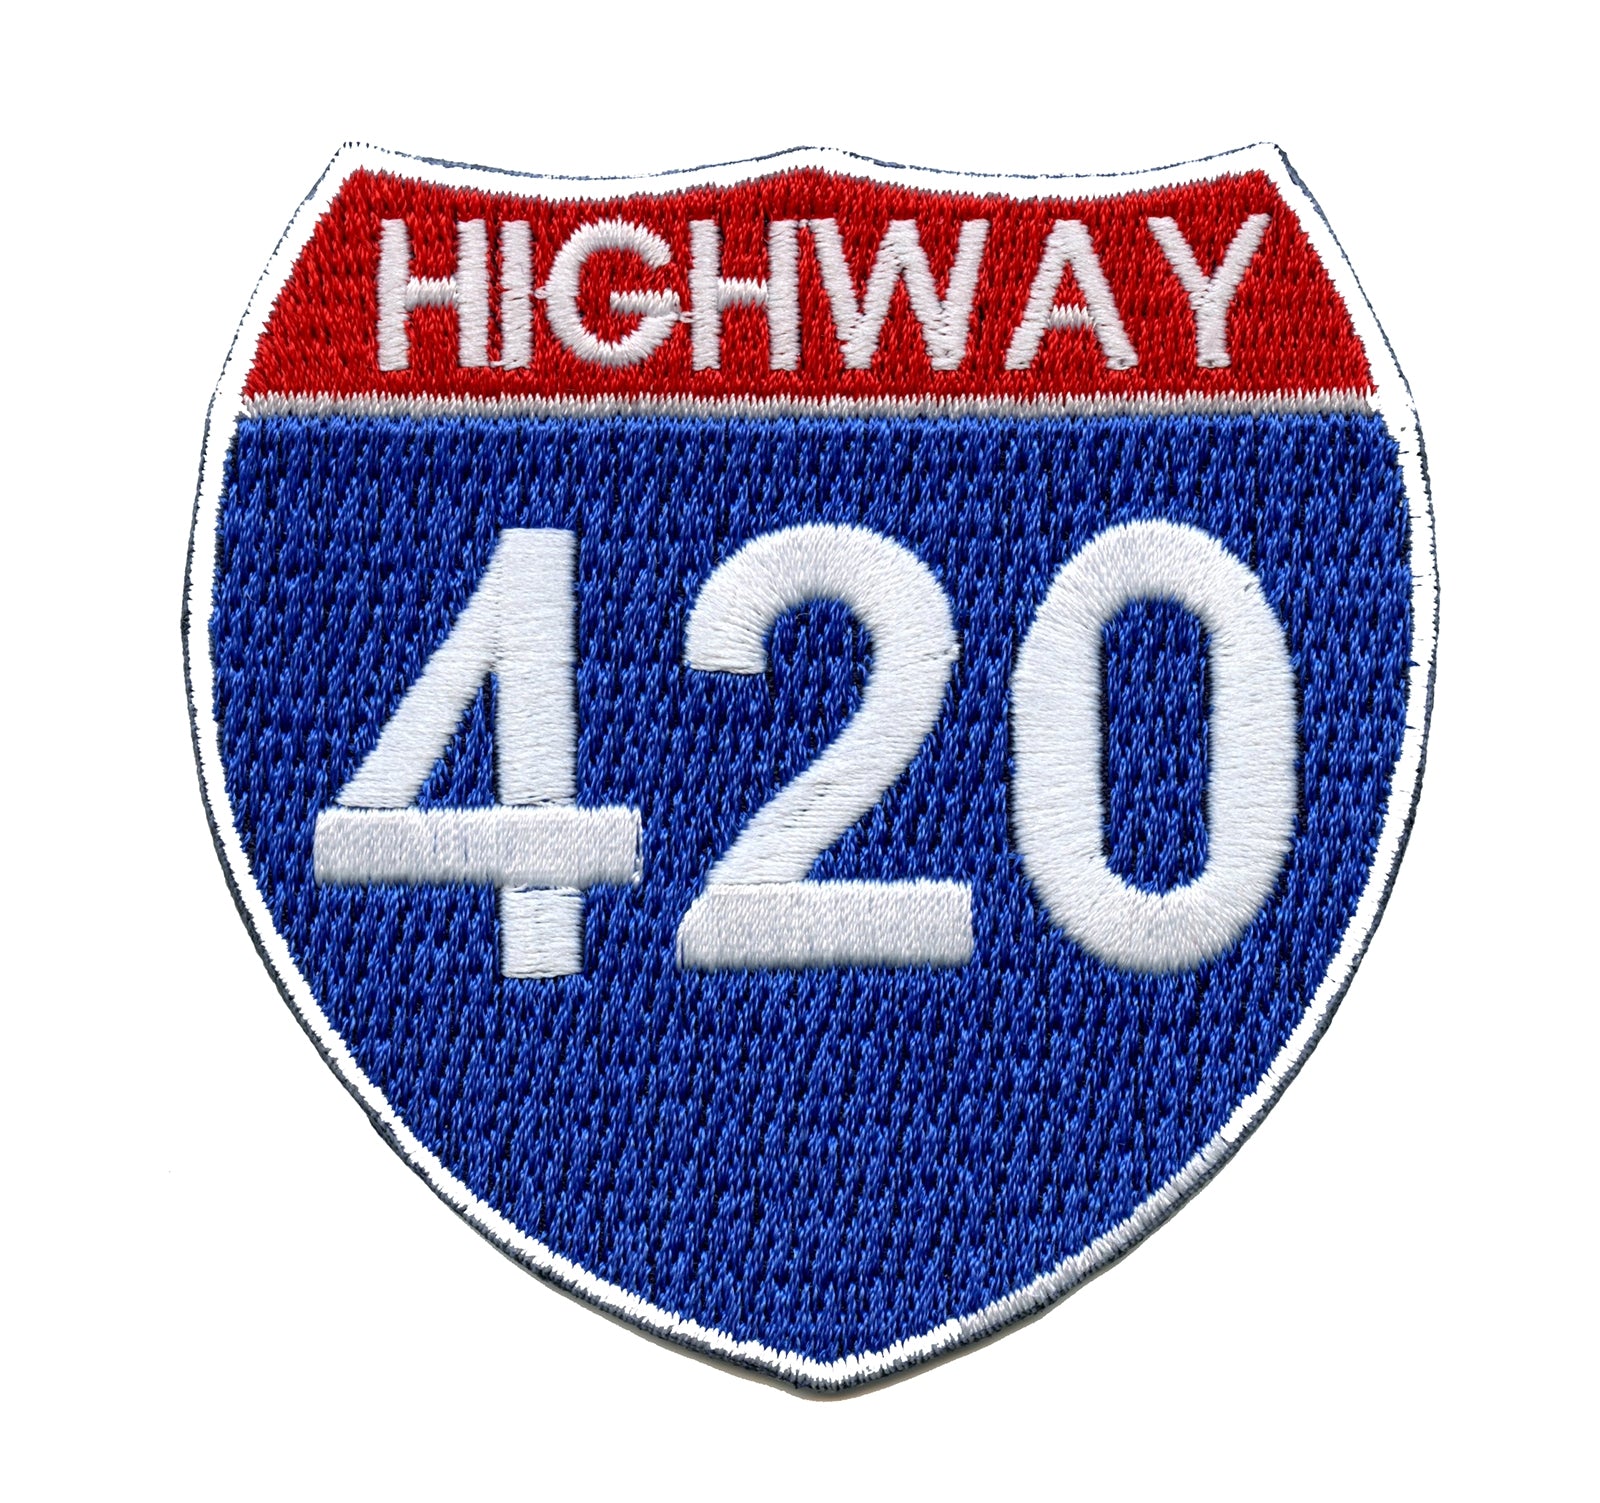 Highway 420 Embroidered Iron-on Patch 